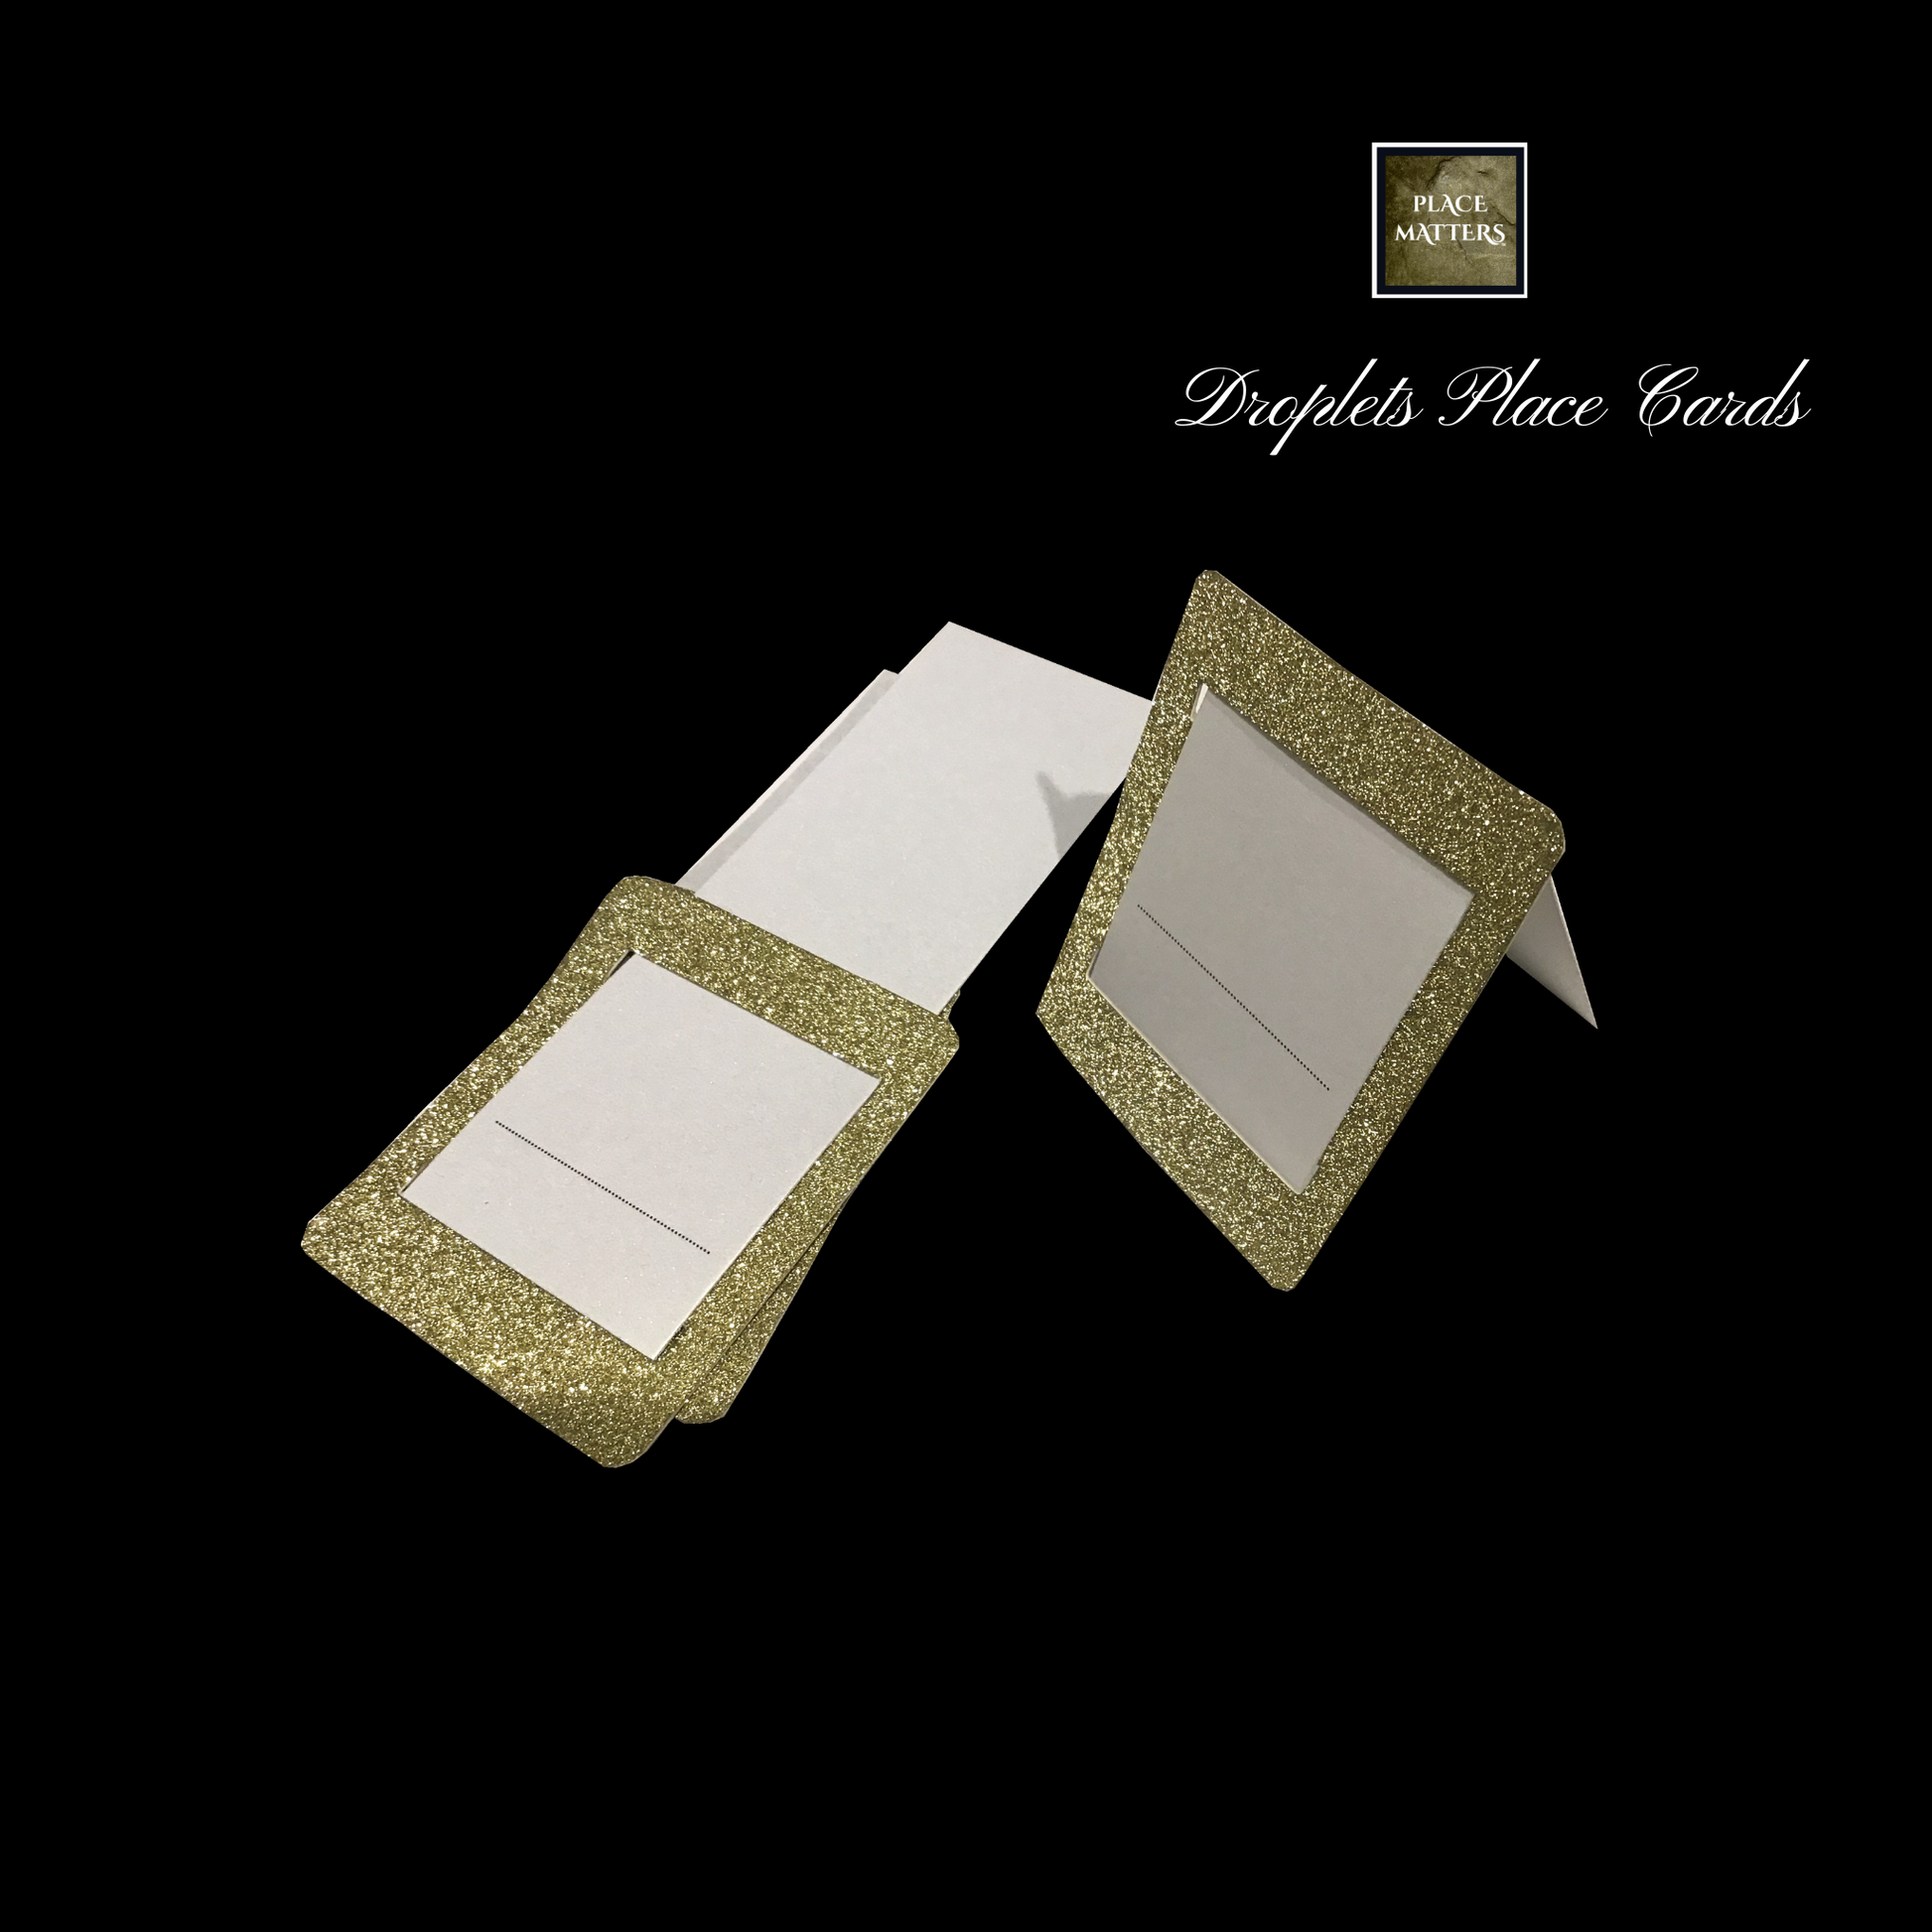 Gold Table Setting Pack (Droplets Design Square Placemats) - Place Matters